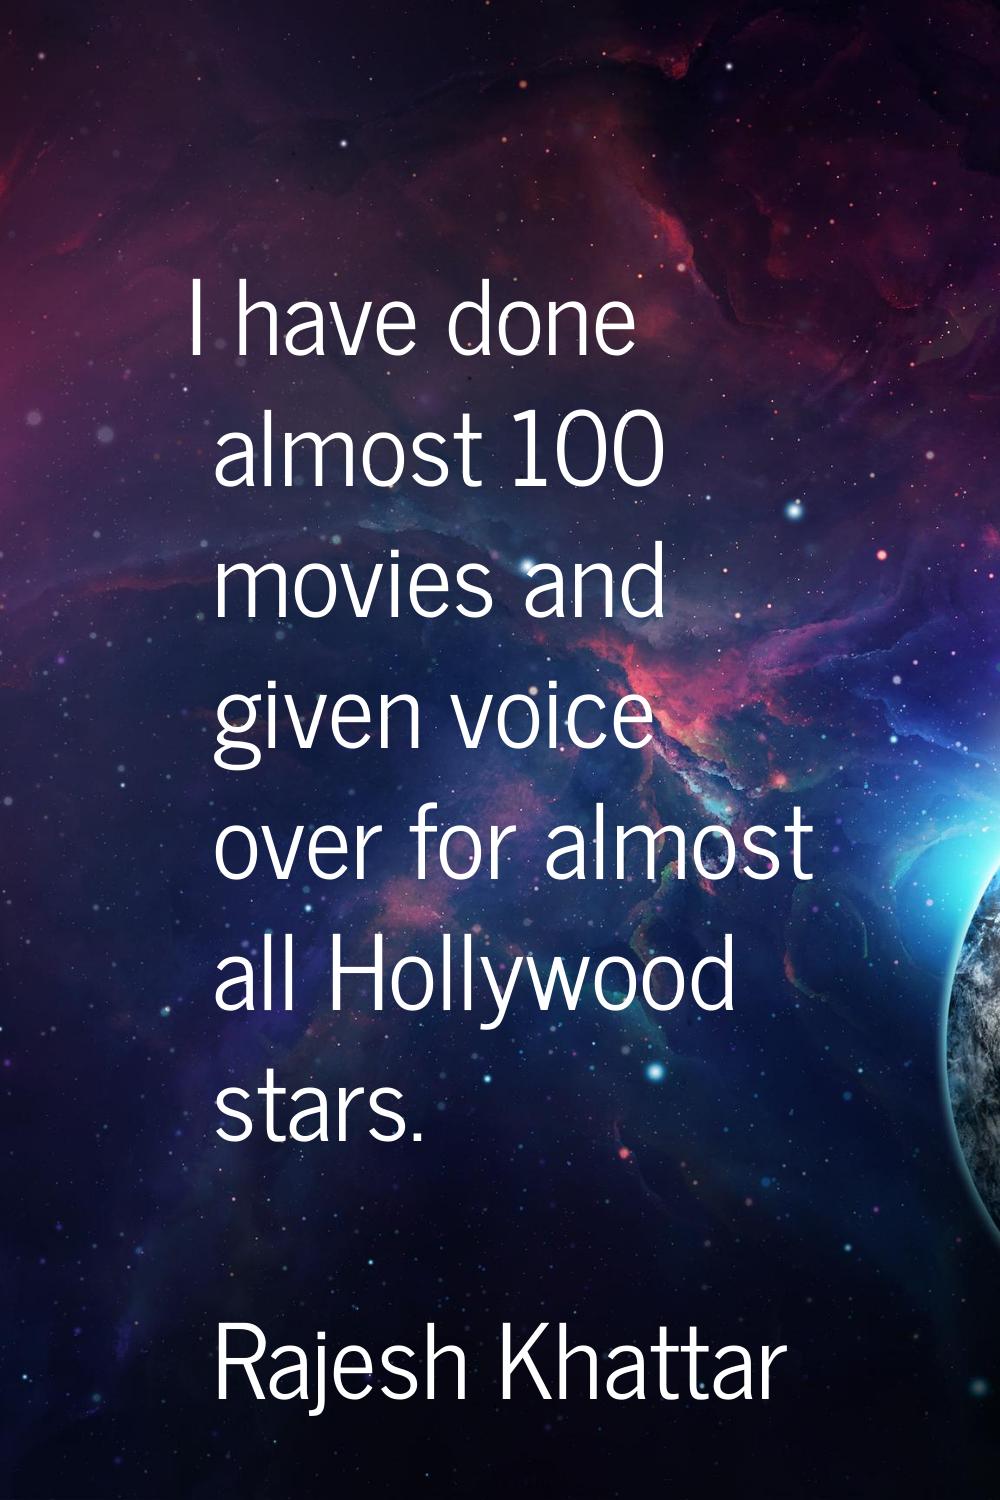 I have done almost 100 movies and given voice over for almost all Hollywood stars.